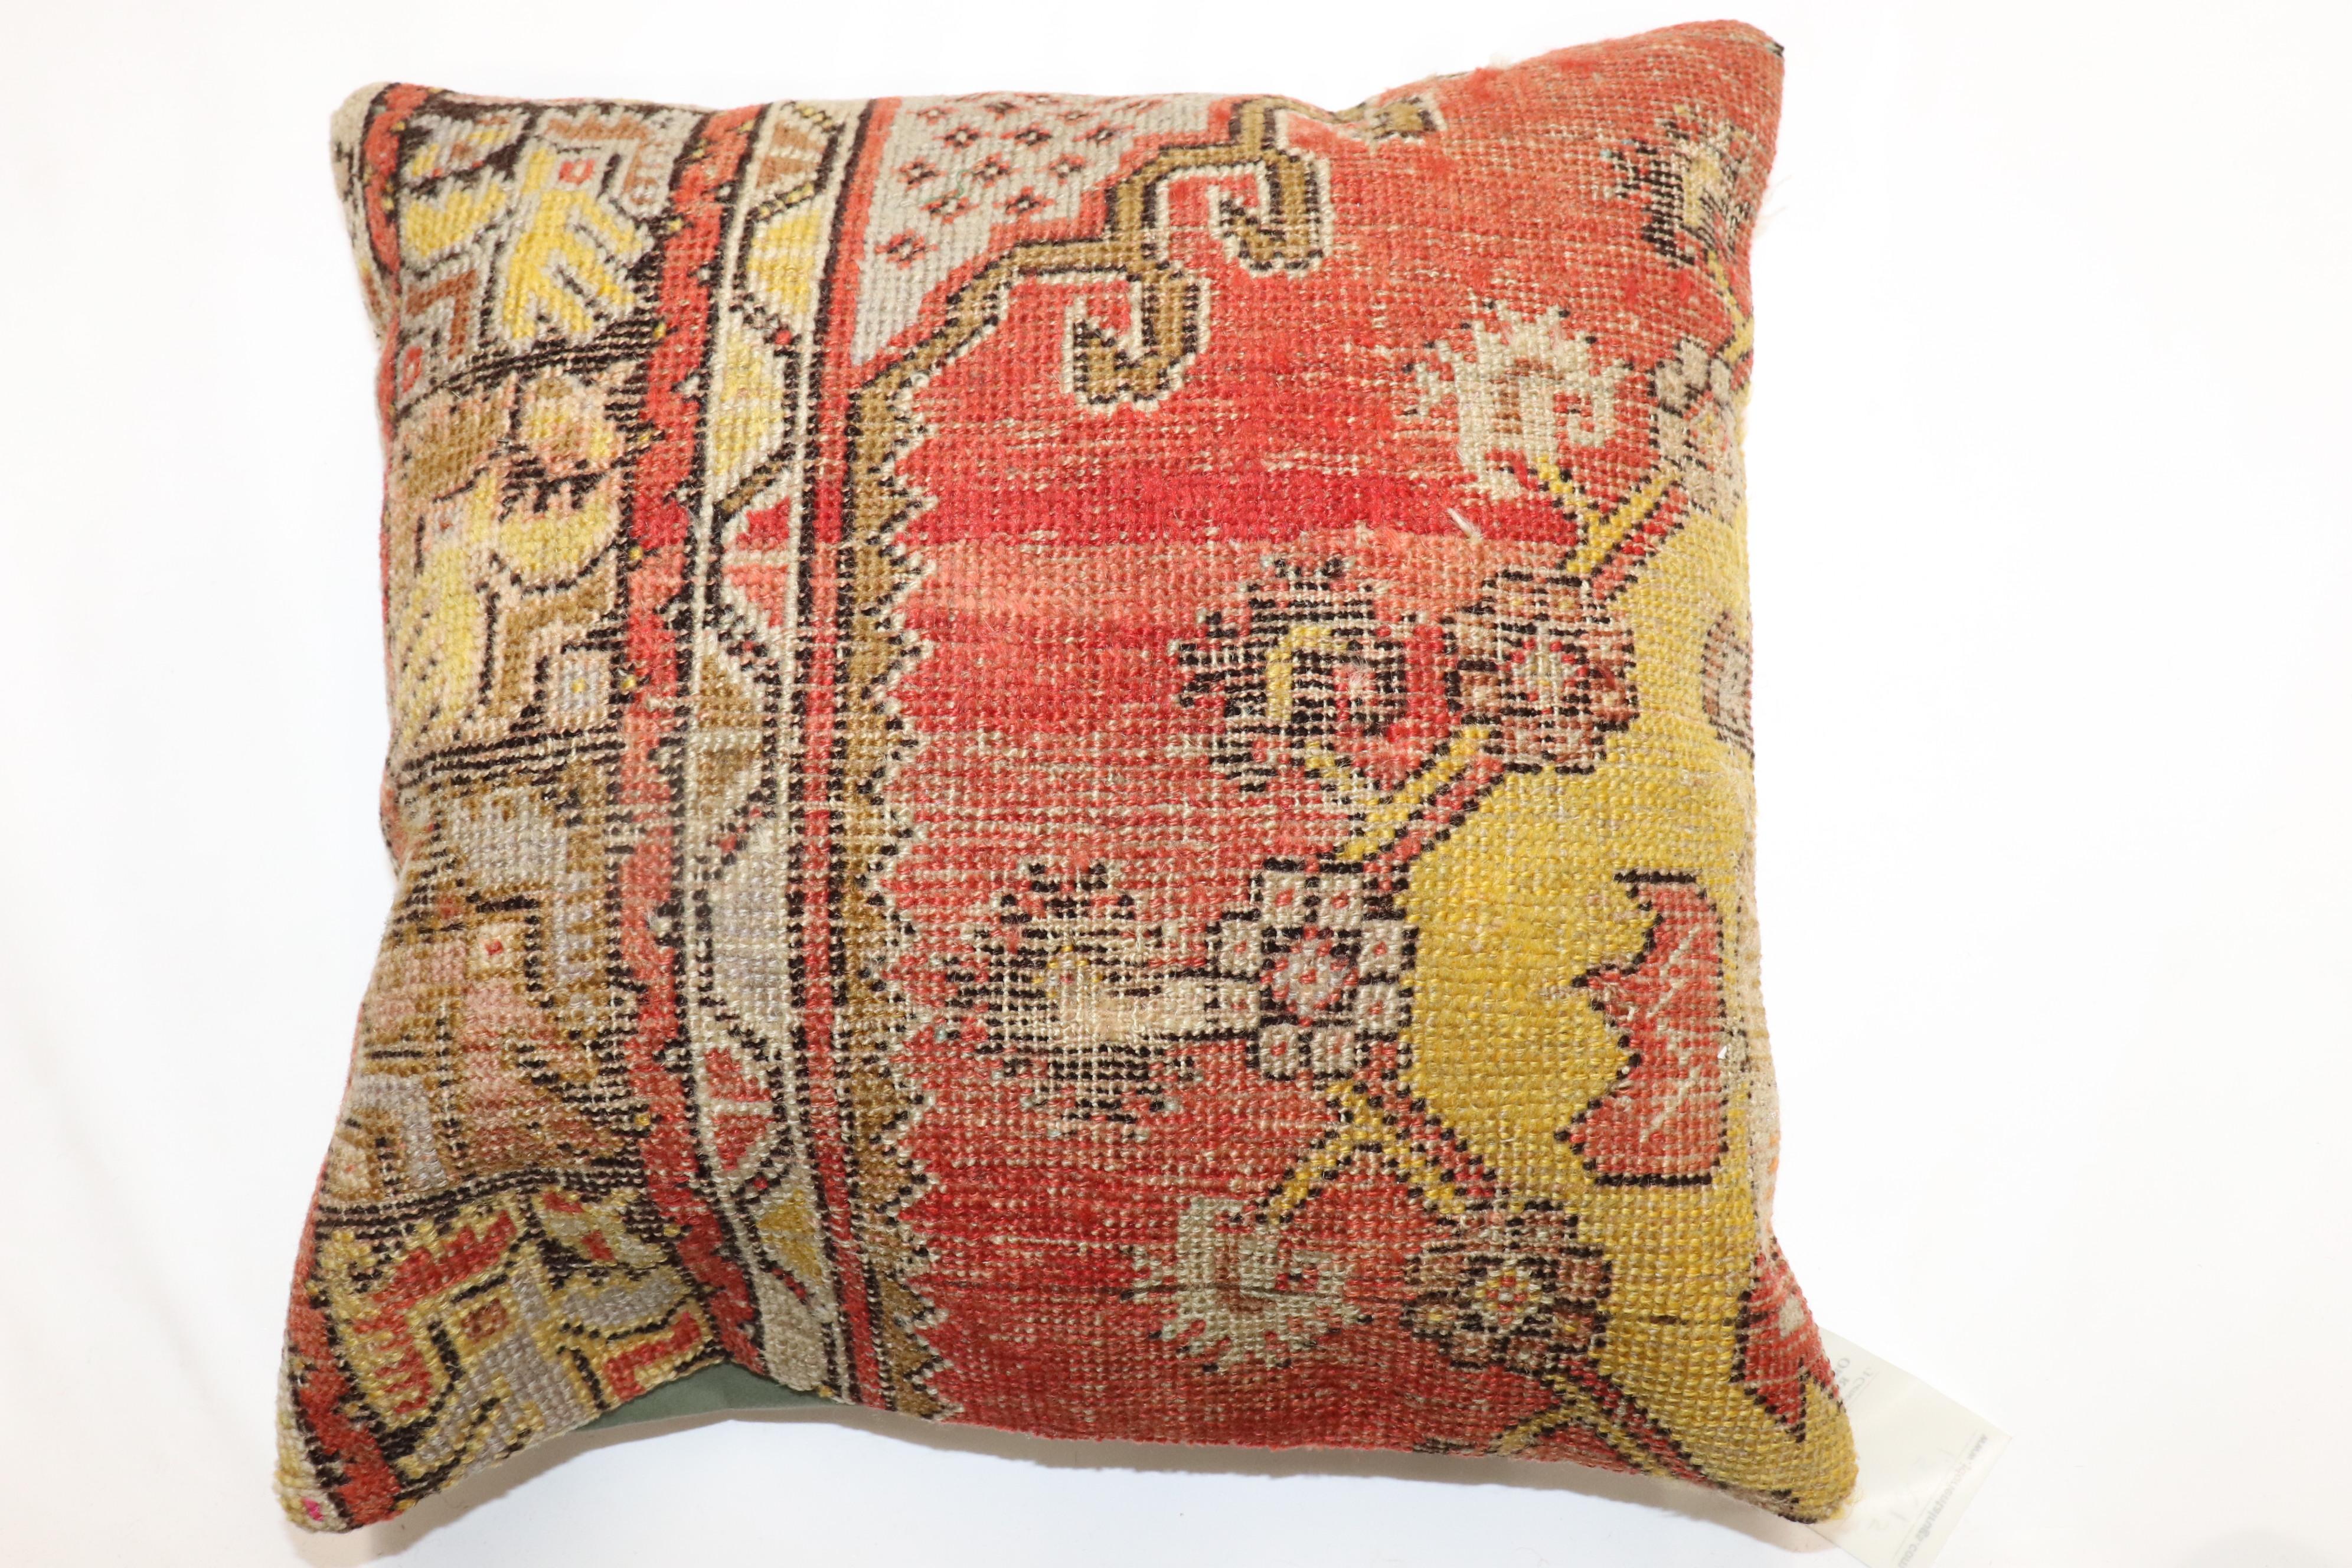 Pillow made from an early 20th century turkish rug. 

Measures: 17'' x 17''